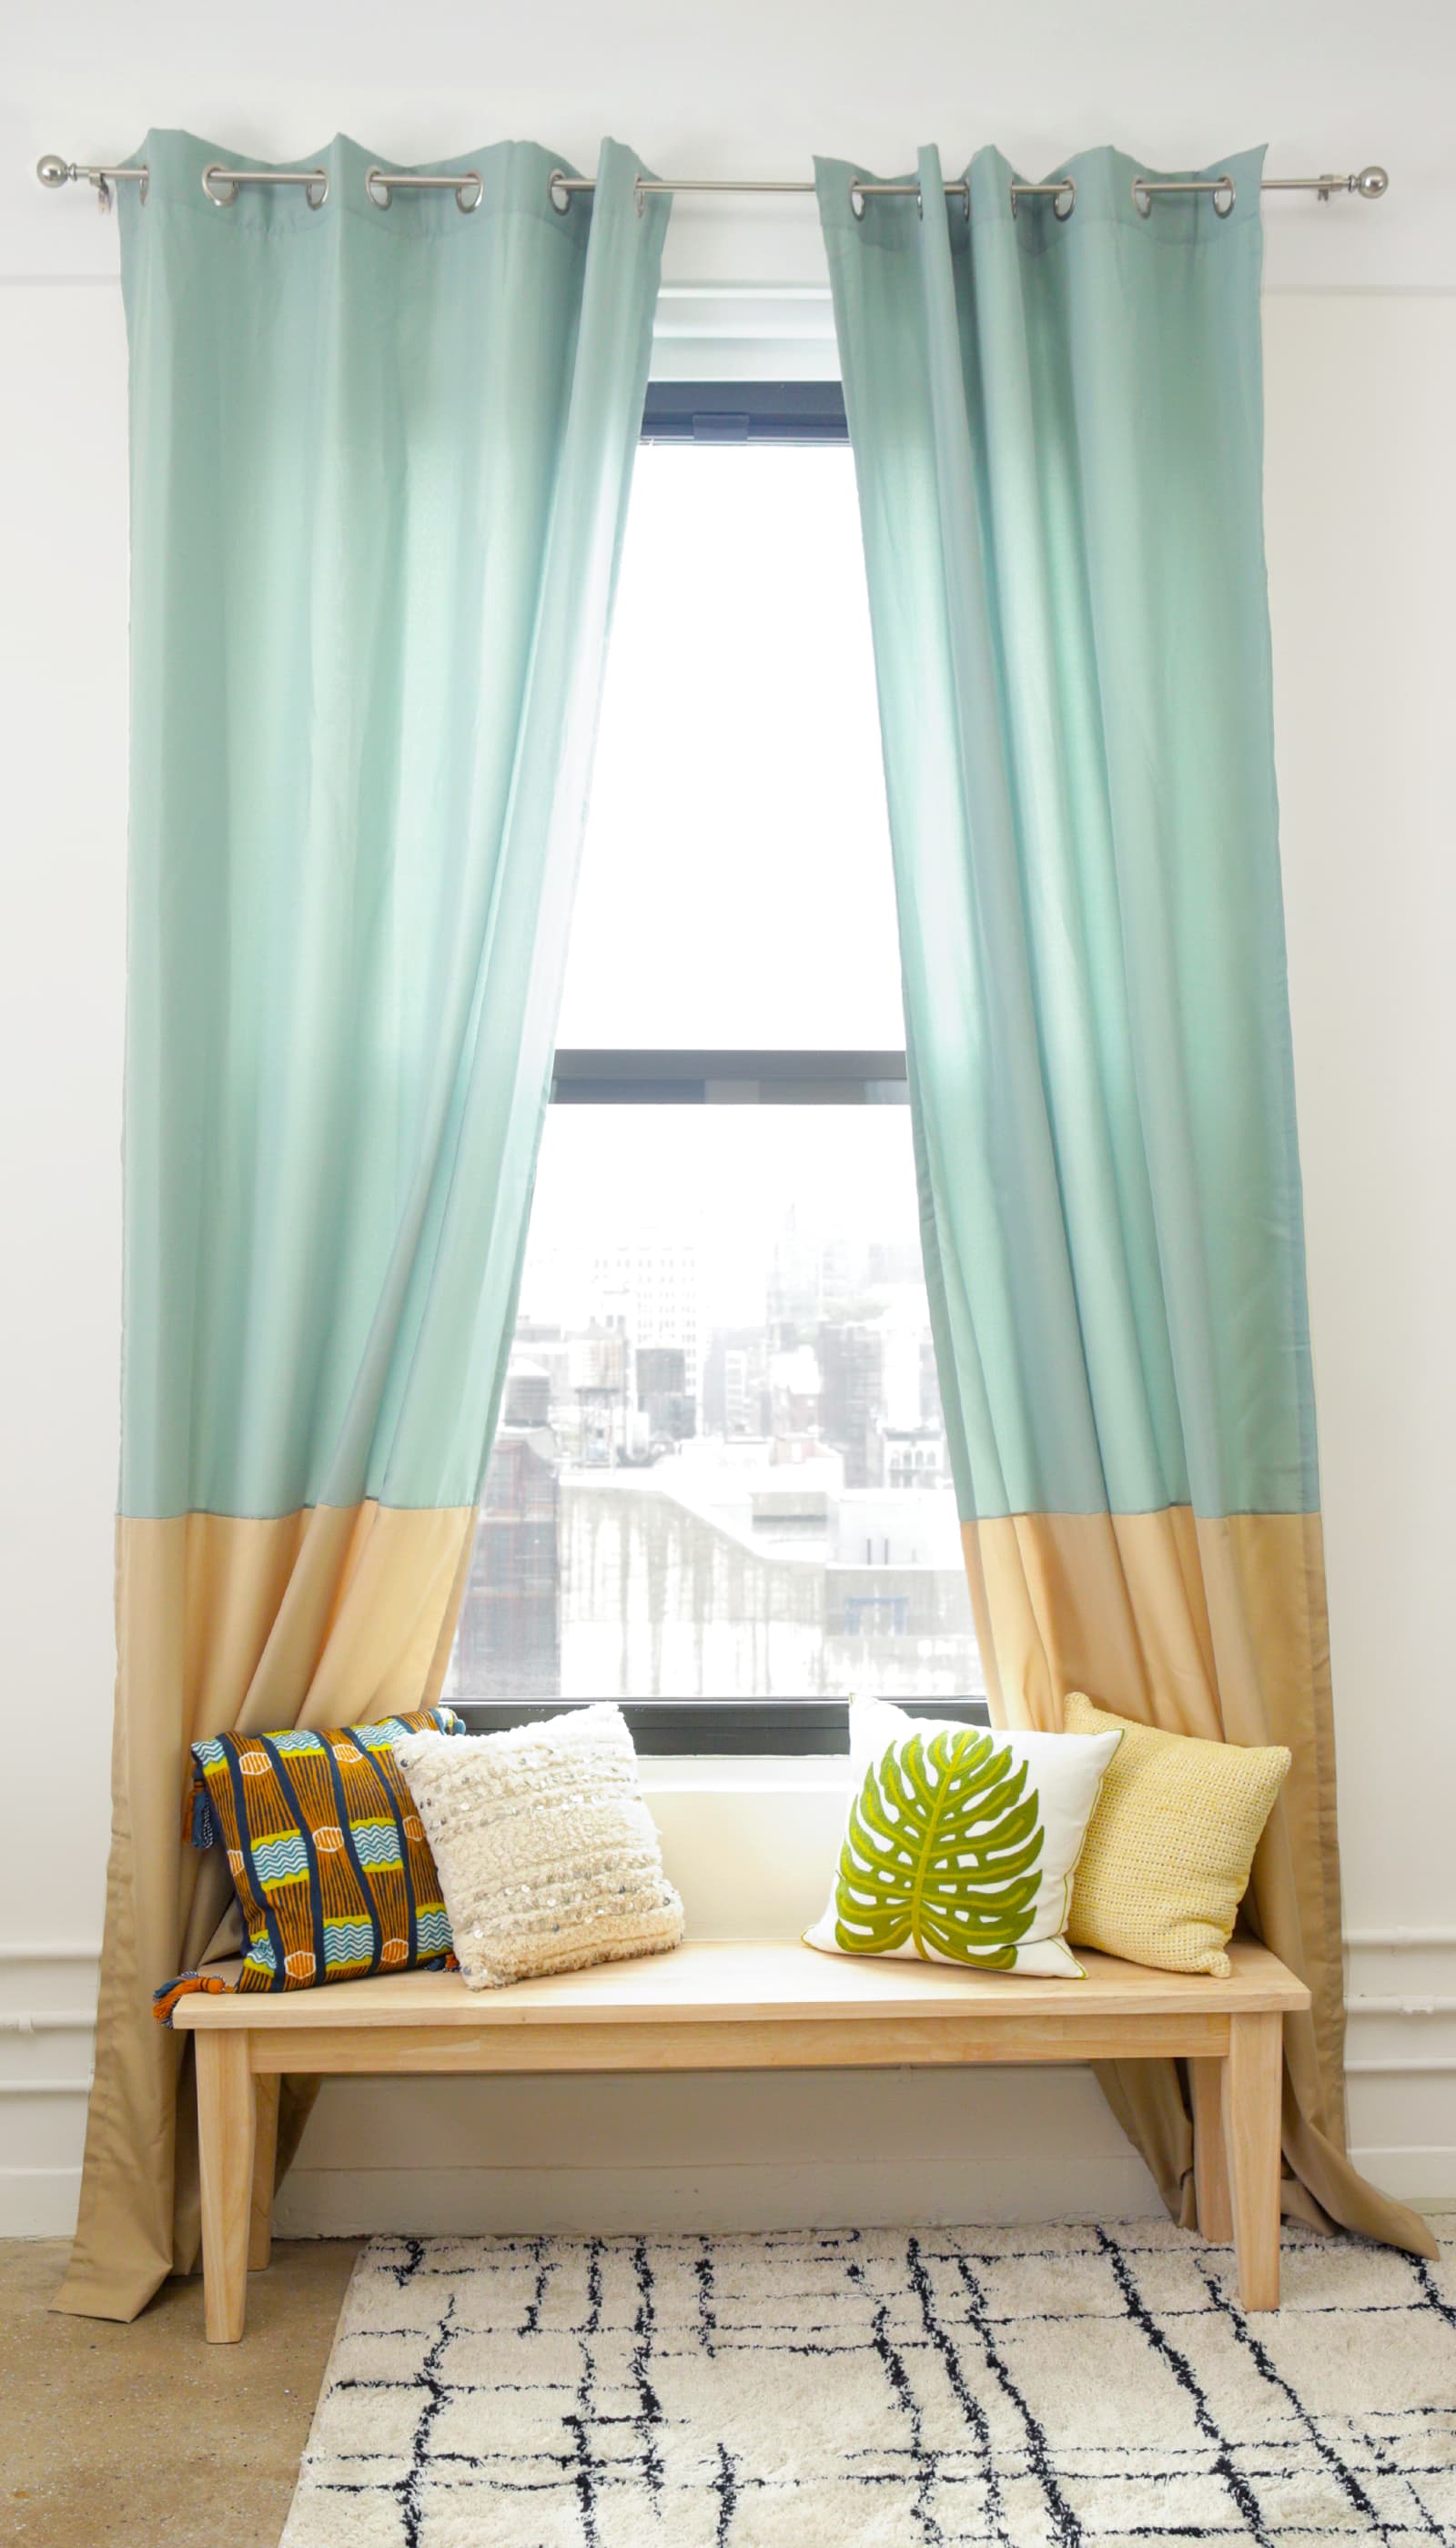 How to Install Curtain Rods: Best Practices